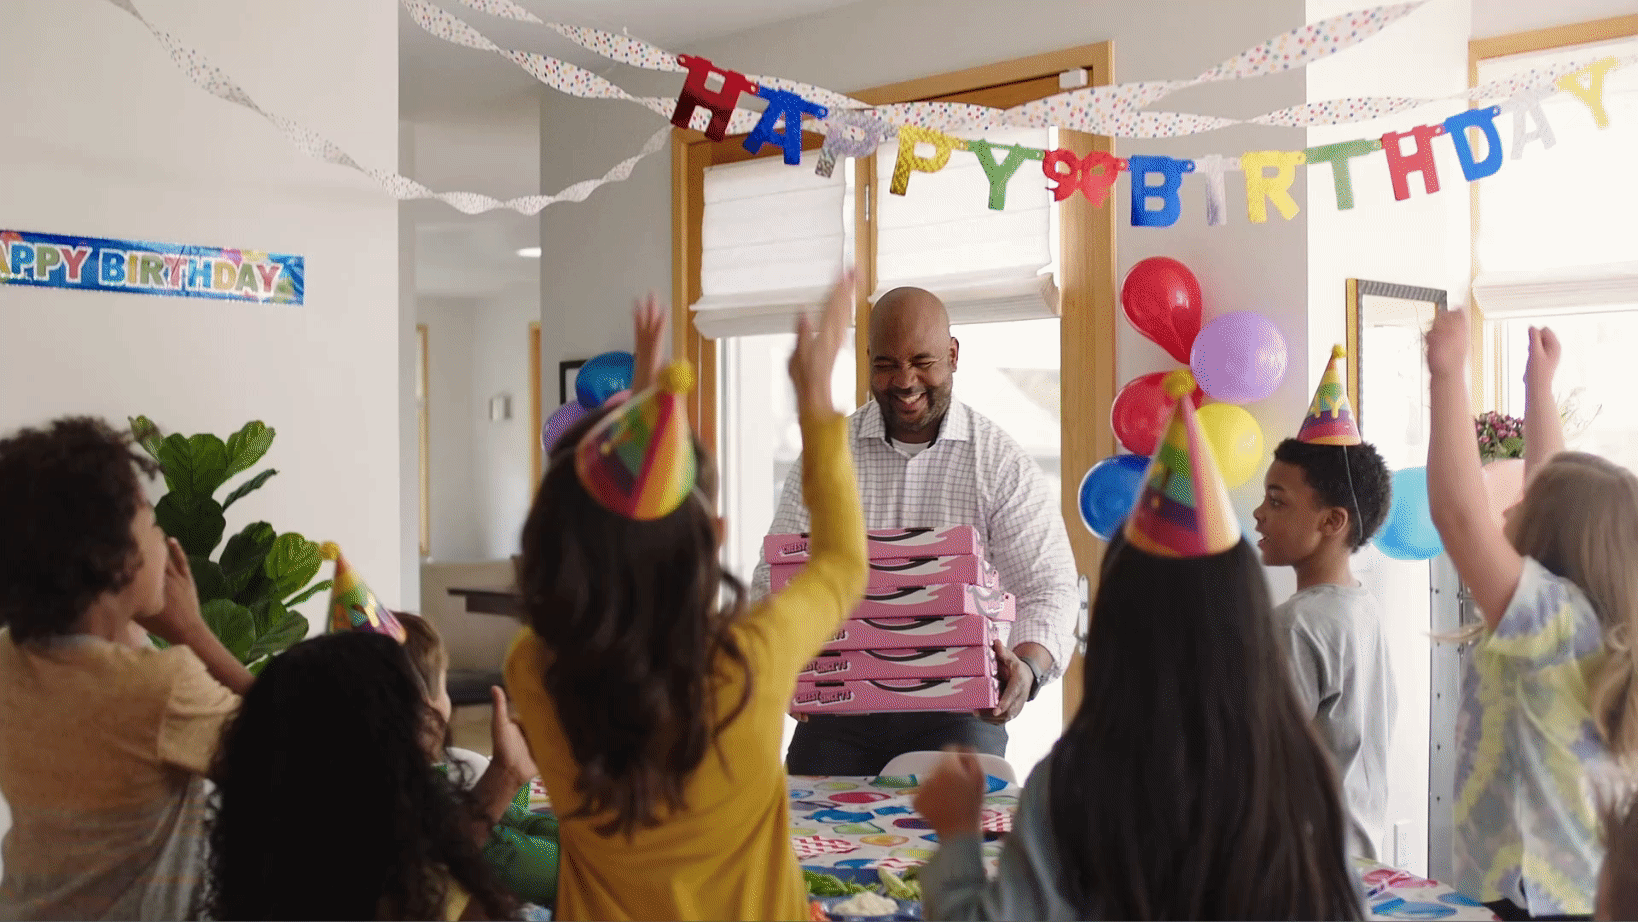 A smiling man carrying pink Hungry Howie’s pizza boxes into a children’s birthday party. The kids in front of the man are jumping and cheering at the arrival of pizza.